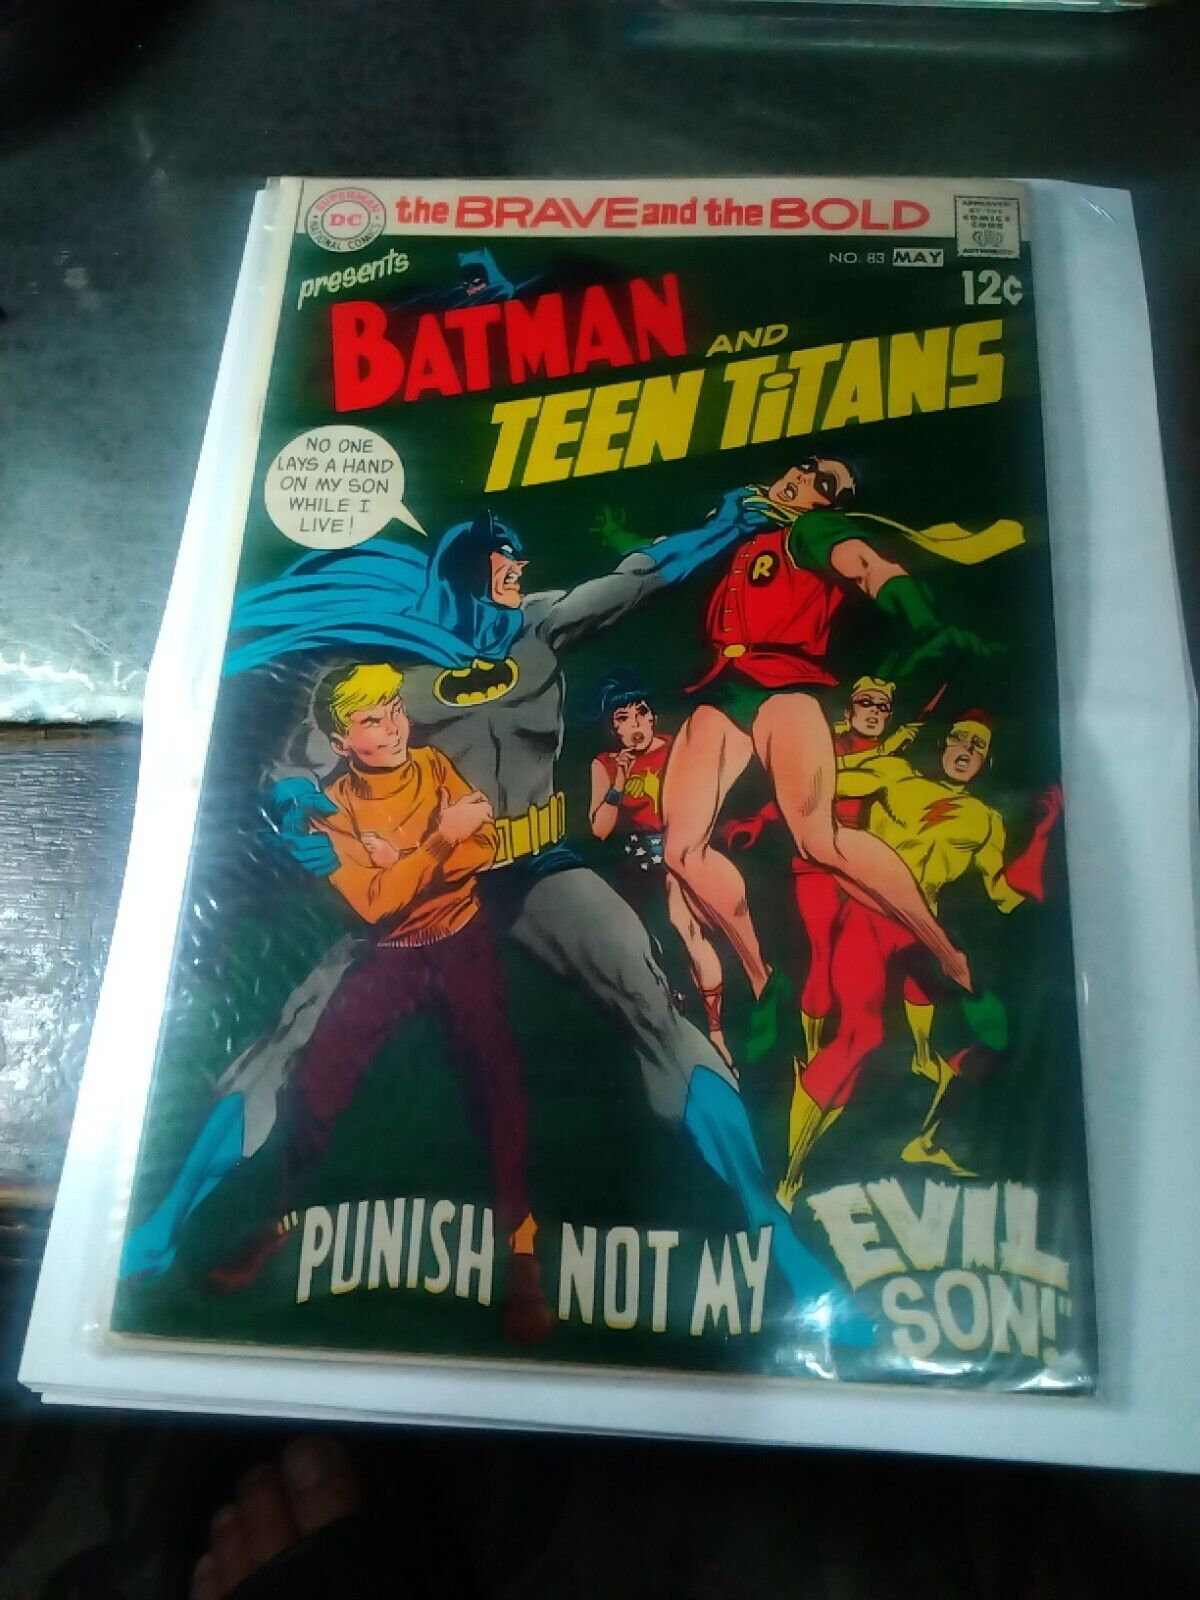 BRAVE AND THE BOLD #83 MAY 1969 BATMAN - TEEN TITANS - NEAL ADAMS ART IN VF+